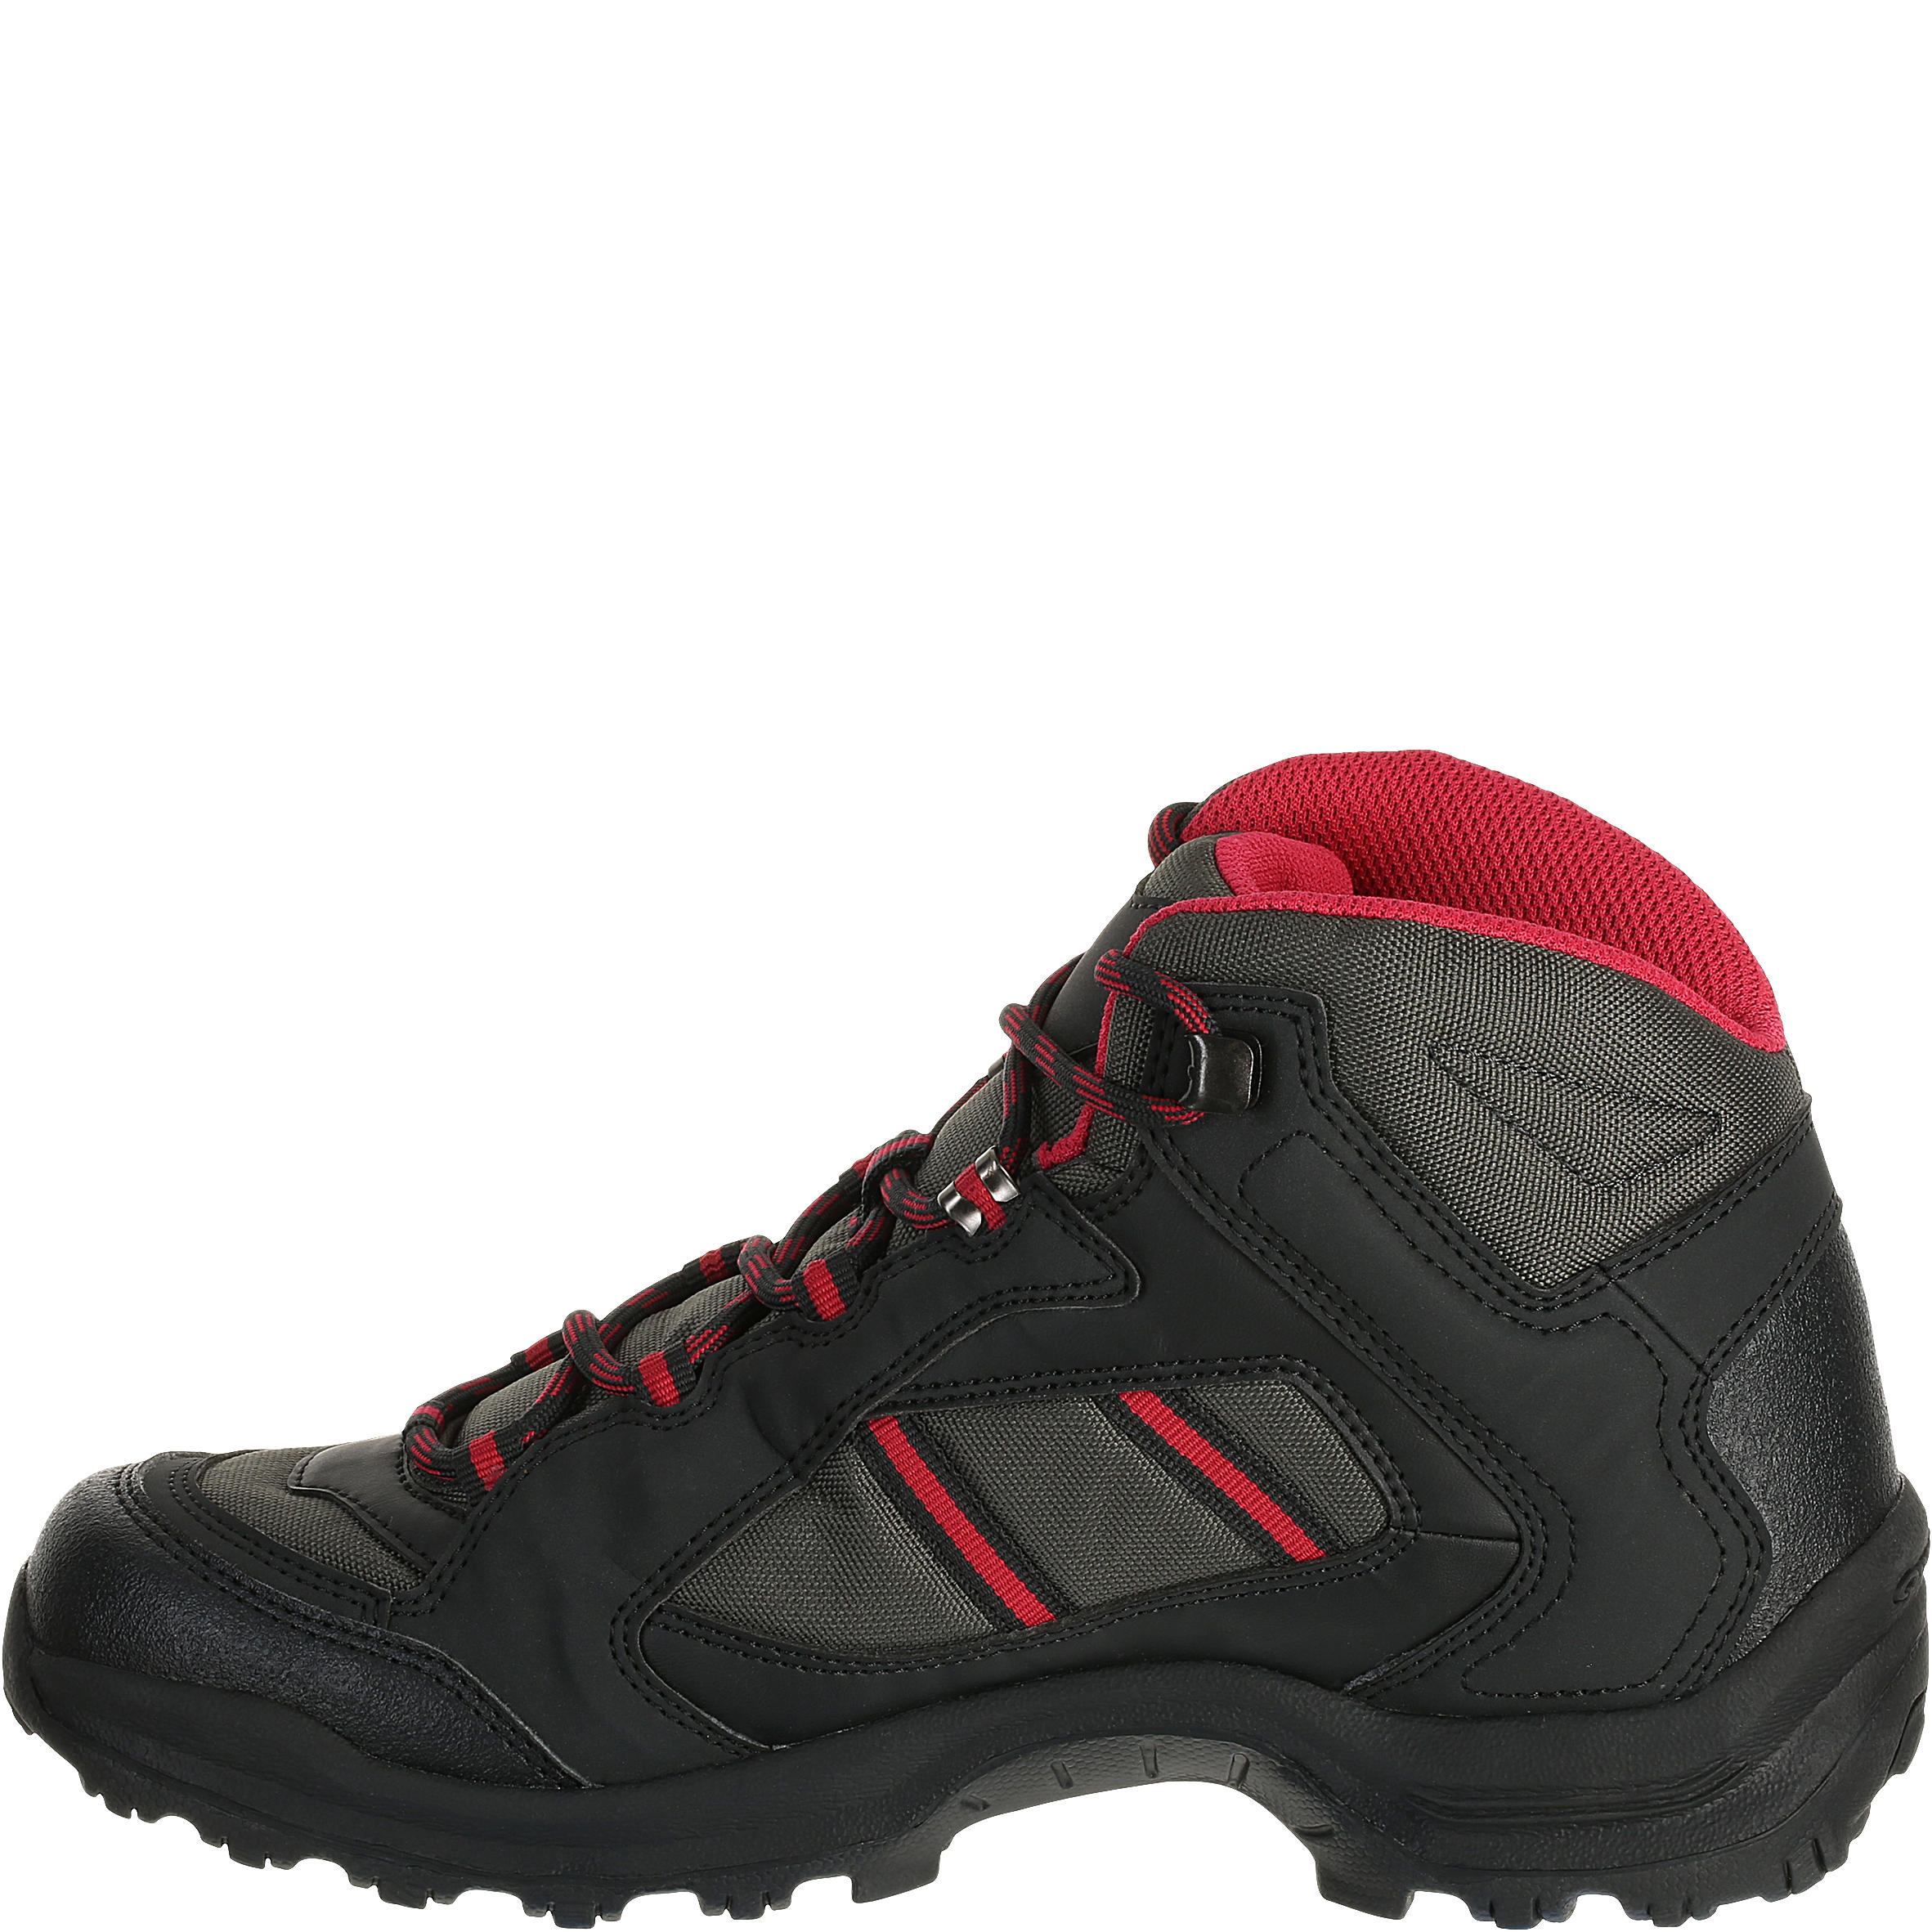 Arpenaz 50 Mid Women's Hiking Boots 